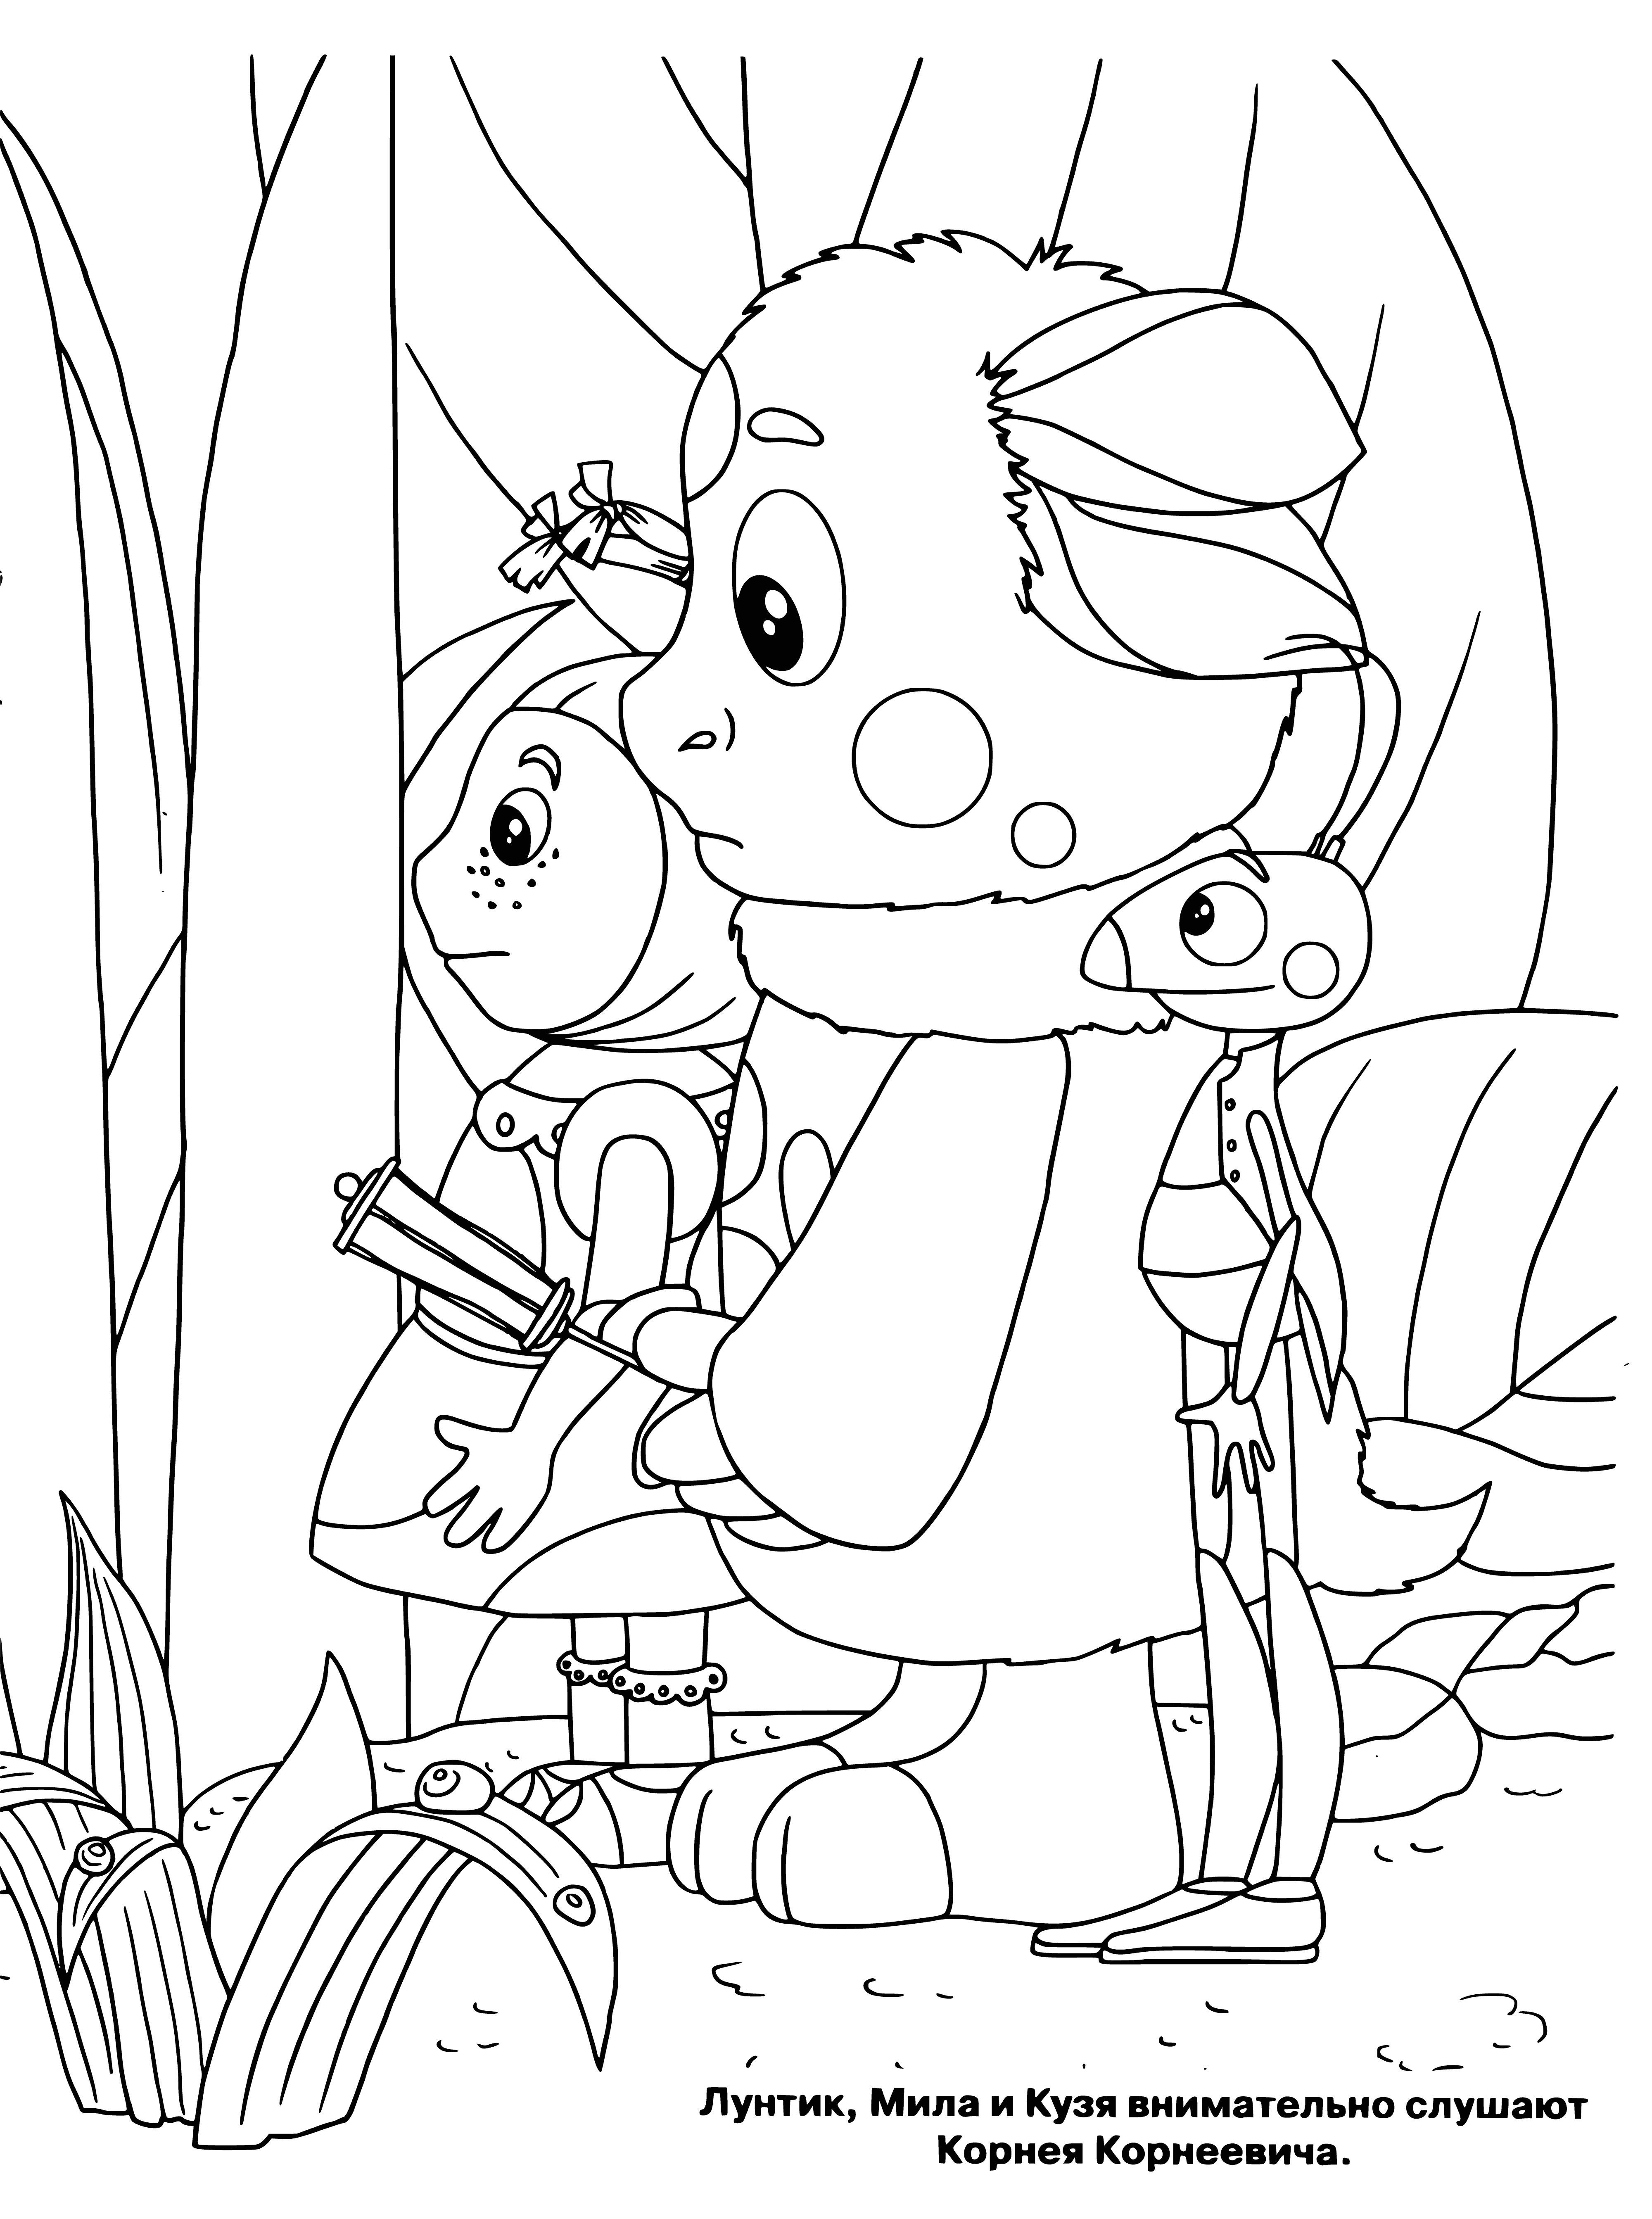 coloring page: Luntik and friends are in a field: Brown & white Luntik, pink Mila, purple Luntikika & blue Kuzya wearing diff. colored stripes.